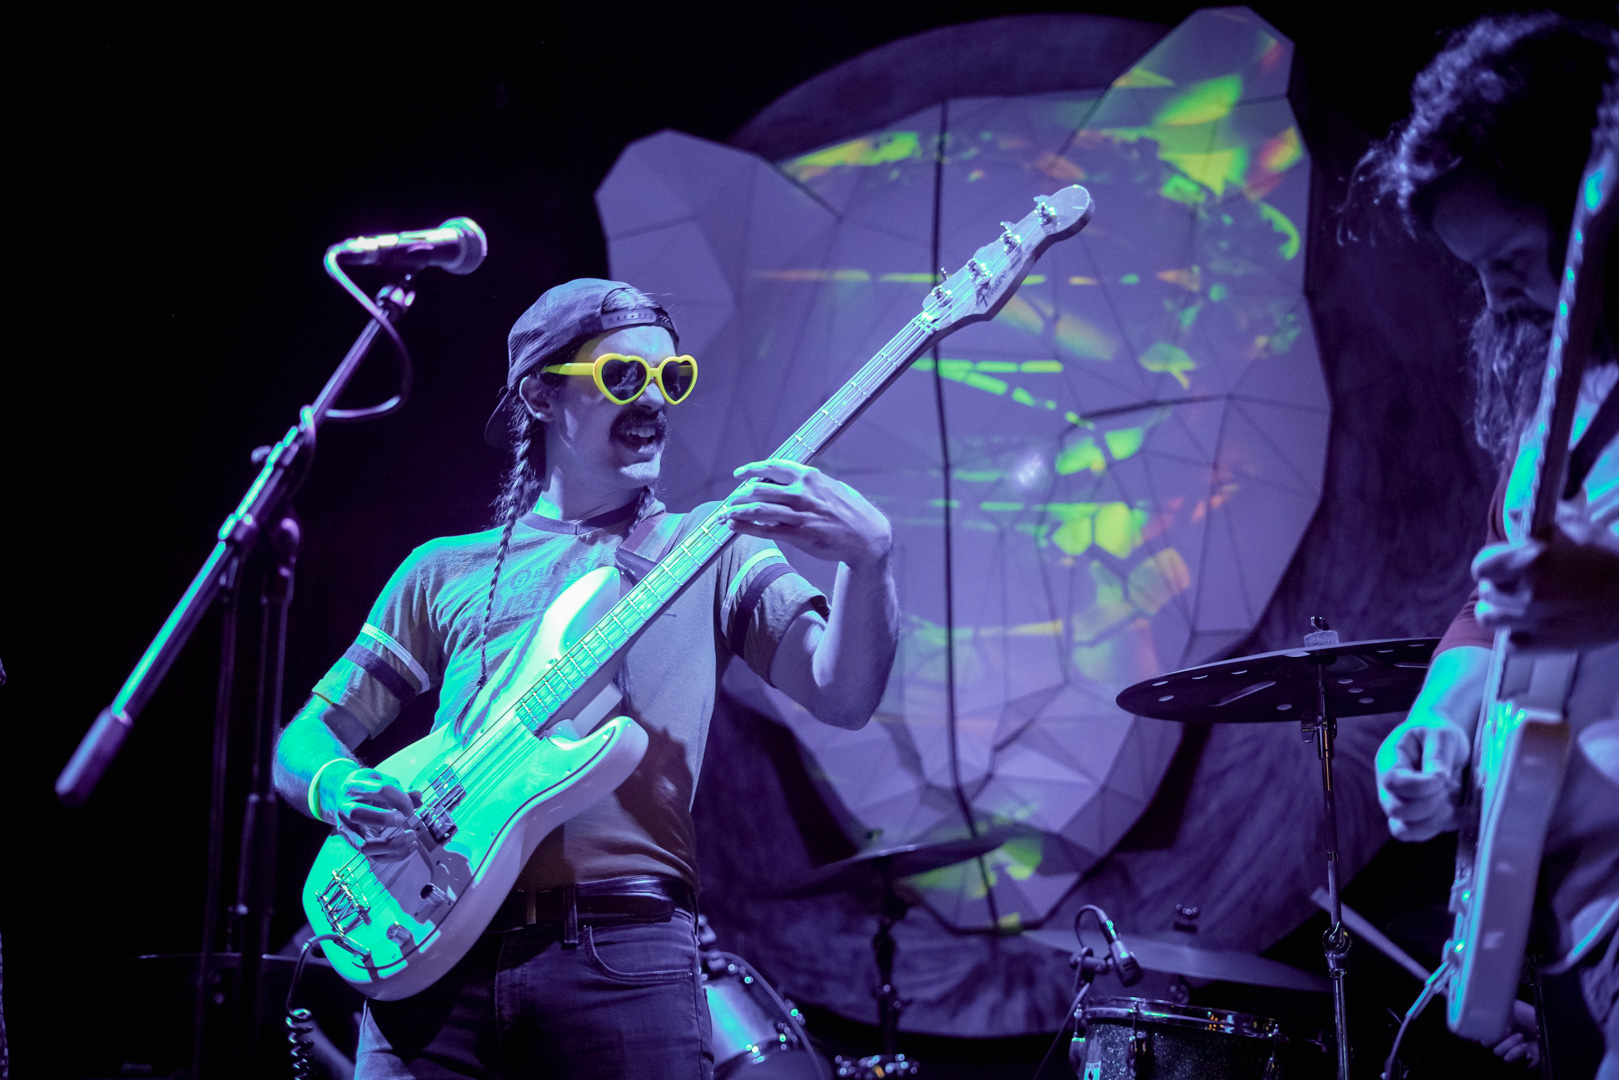 A man plays guitar while wearing heart-shaped glowing sunglasses